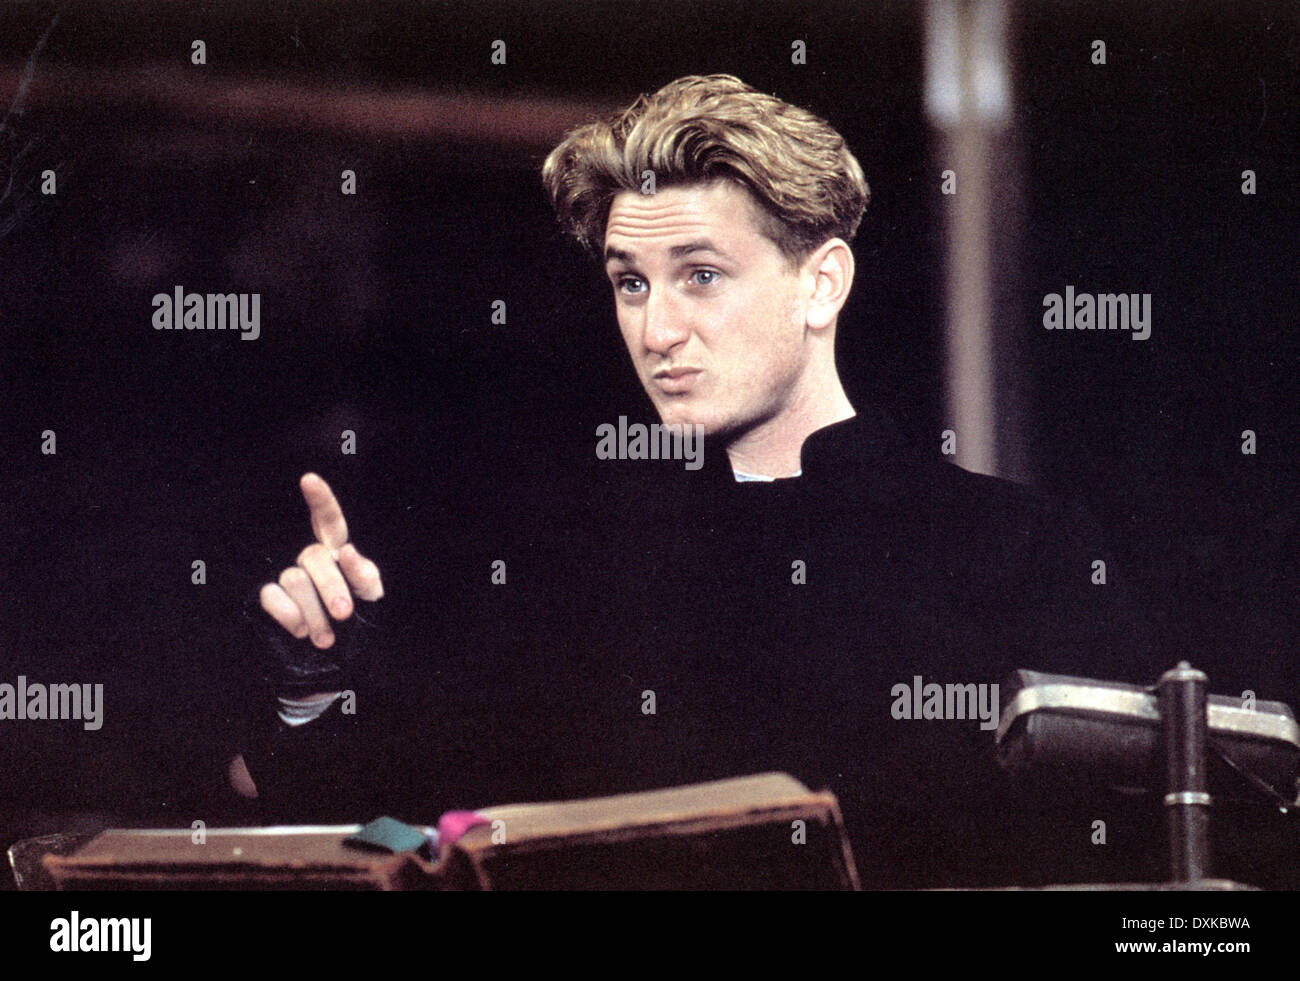 WE'RE NO ANGELS (US  1989) PARAMOUNT PICTURES SEAN PENN Stock Photo